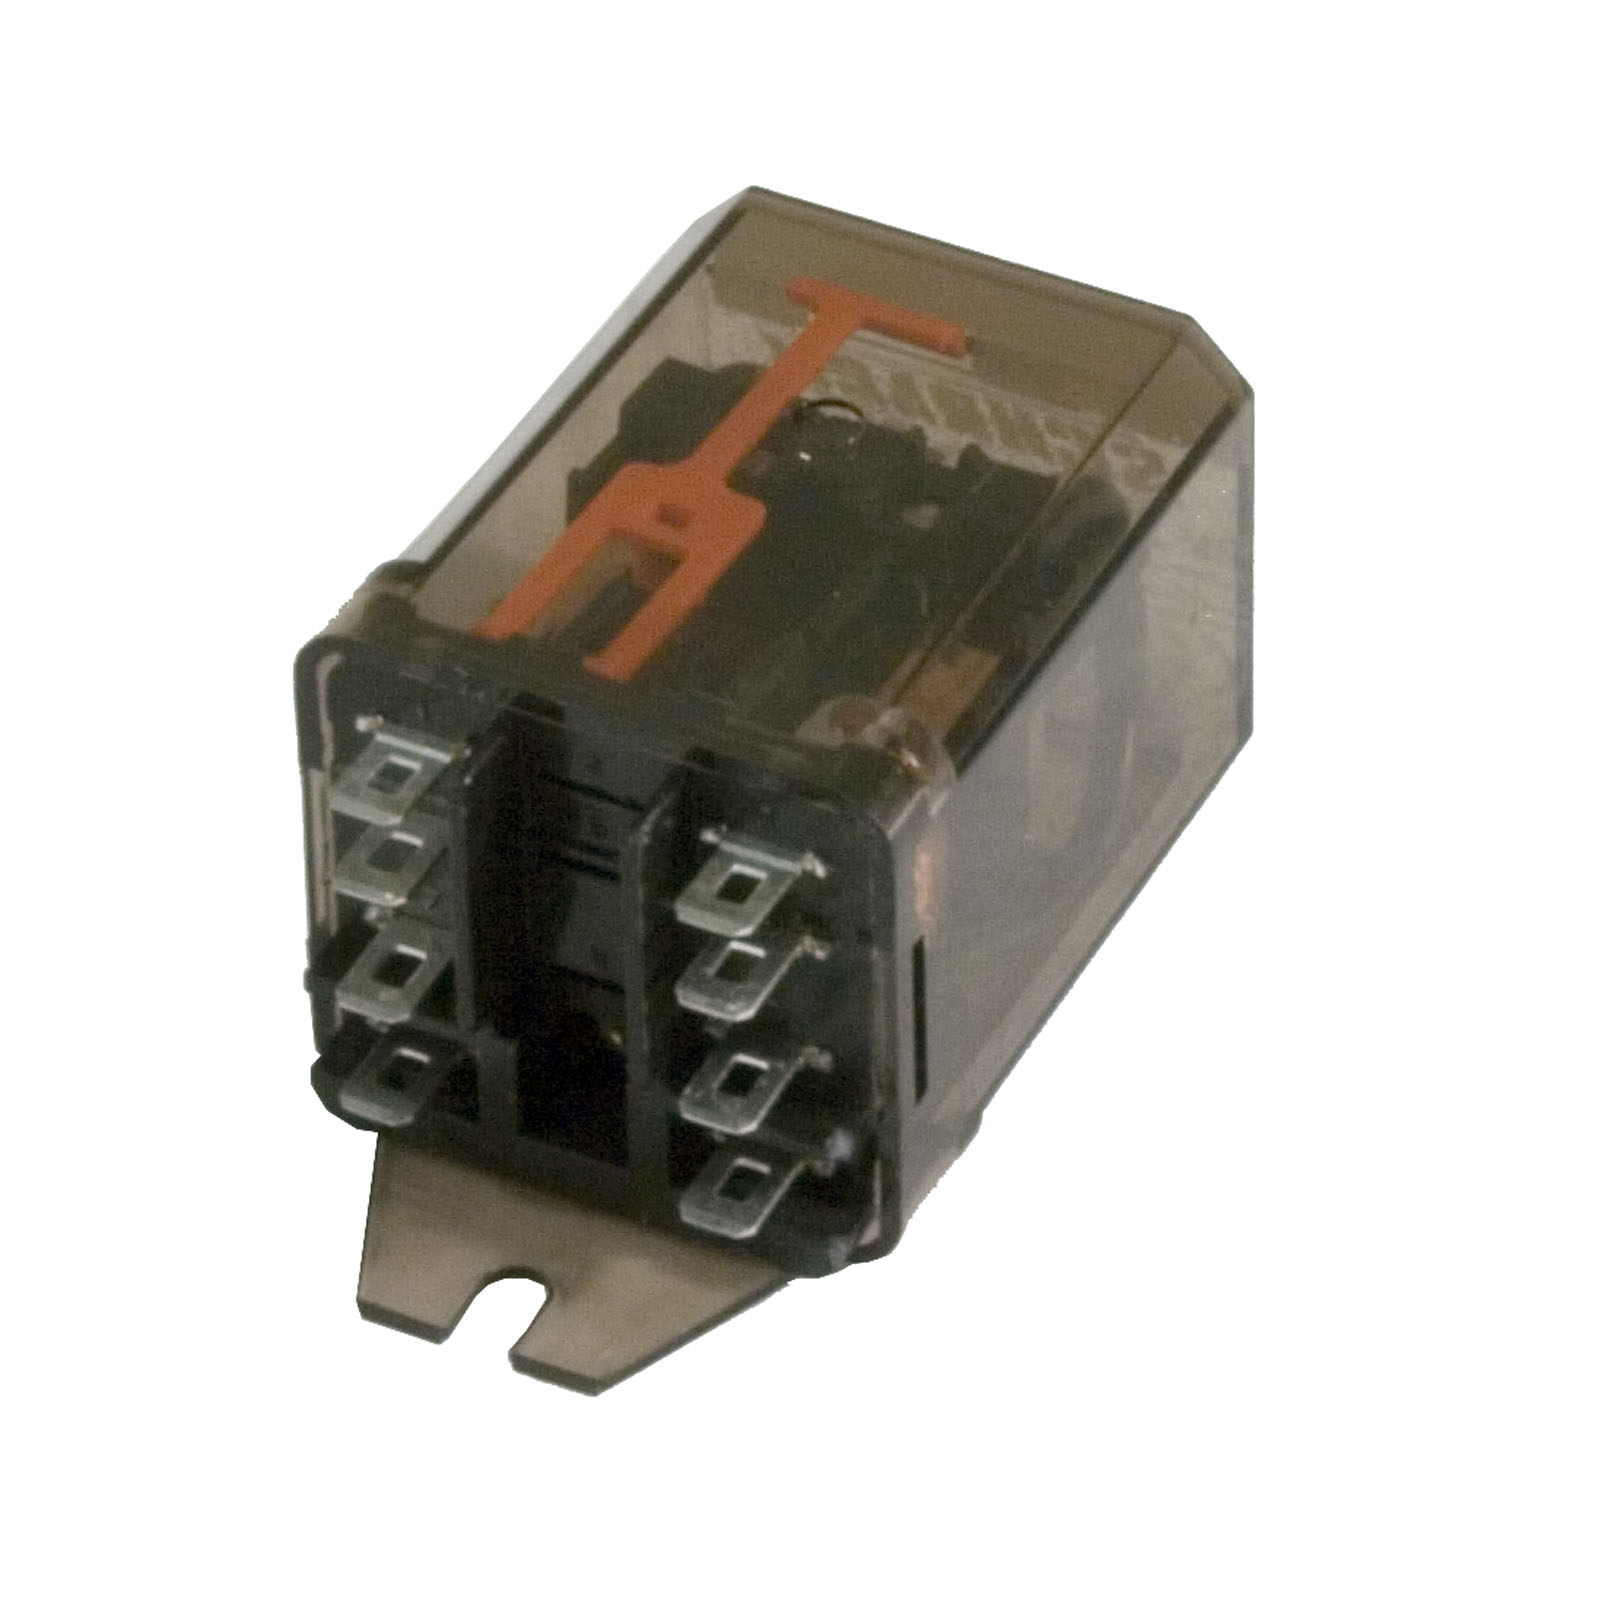 Picture of RM203-615 Relay Schrack RM203-615 DPDT 16A 115v